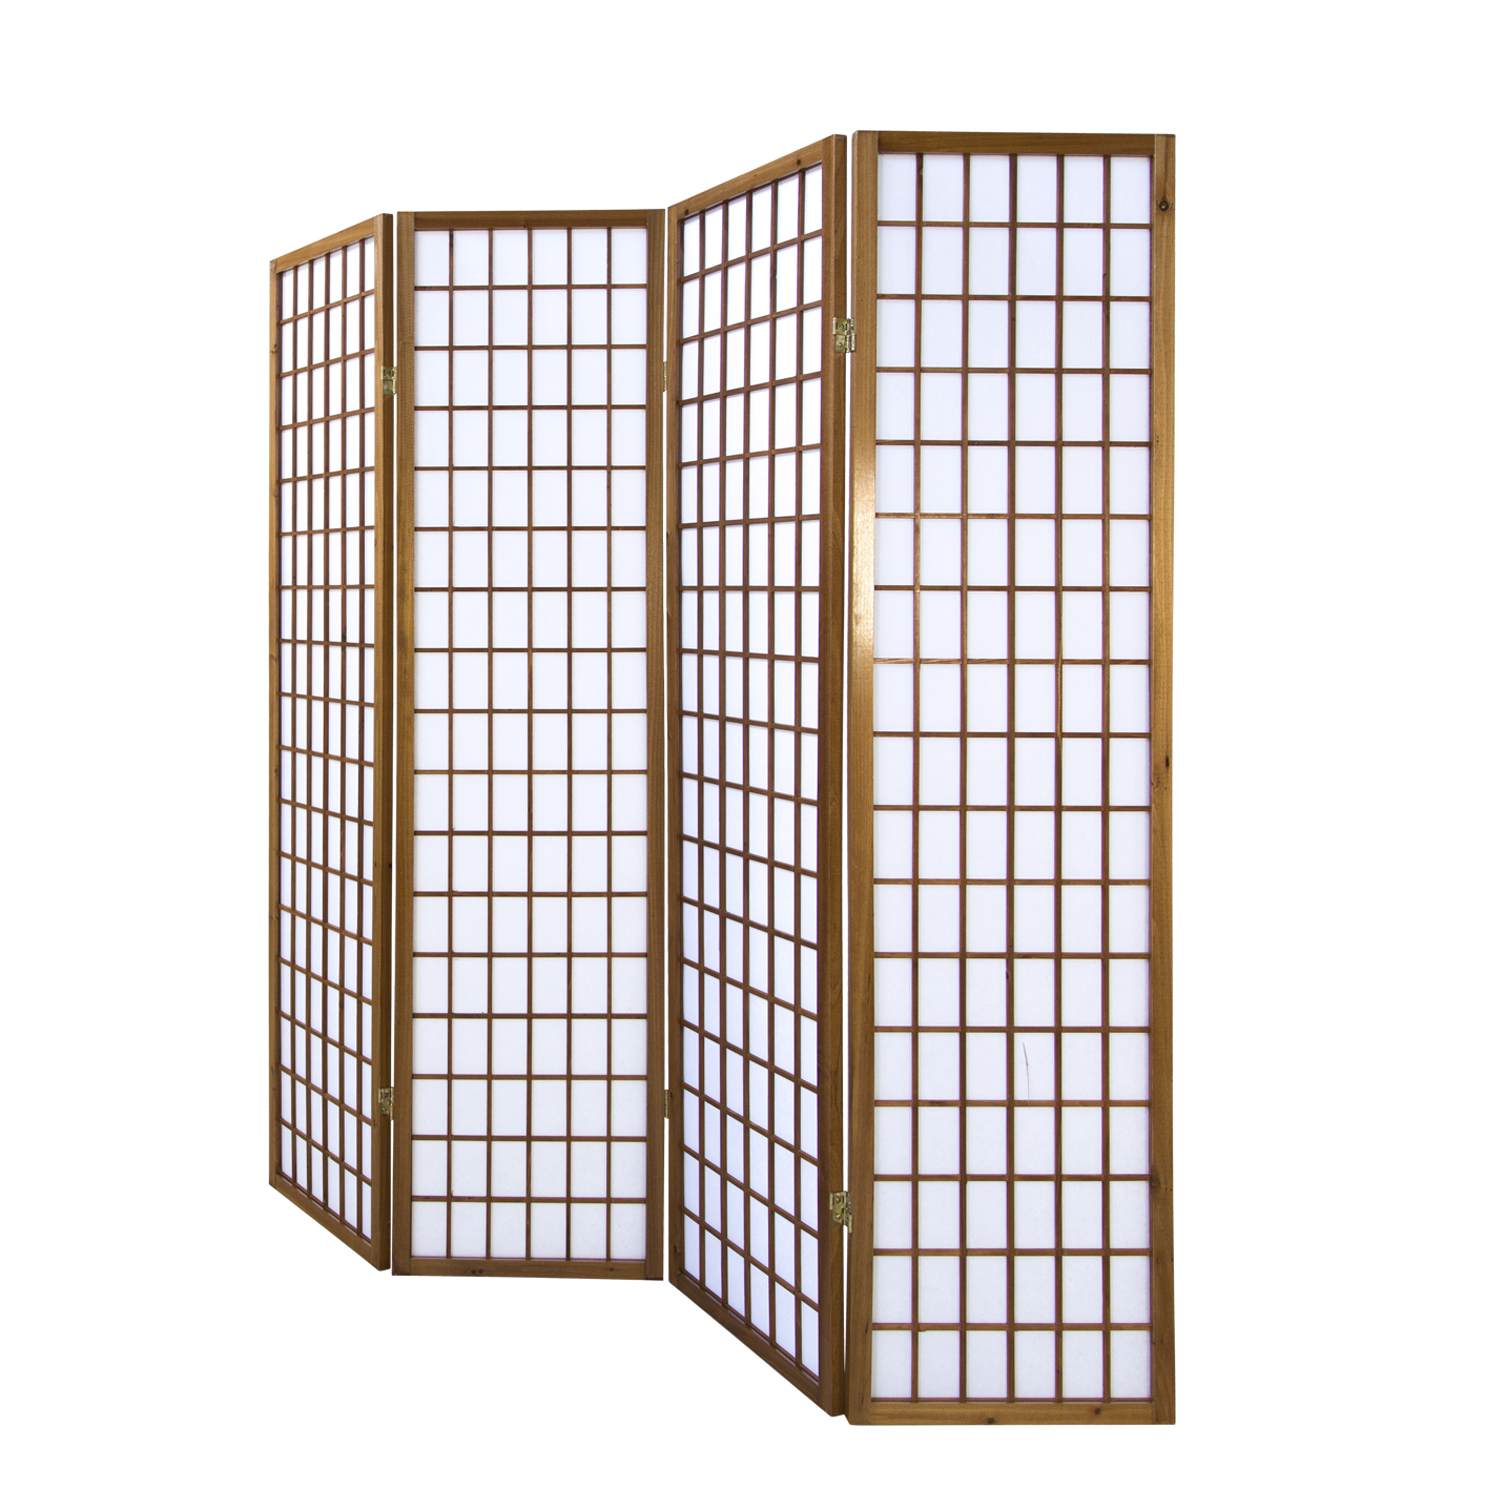 Screen Room Divider 4 parts Brown Wood Partition Wall Shoji White Separation Foldable